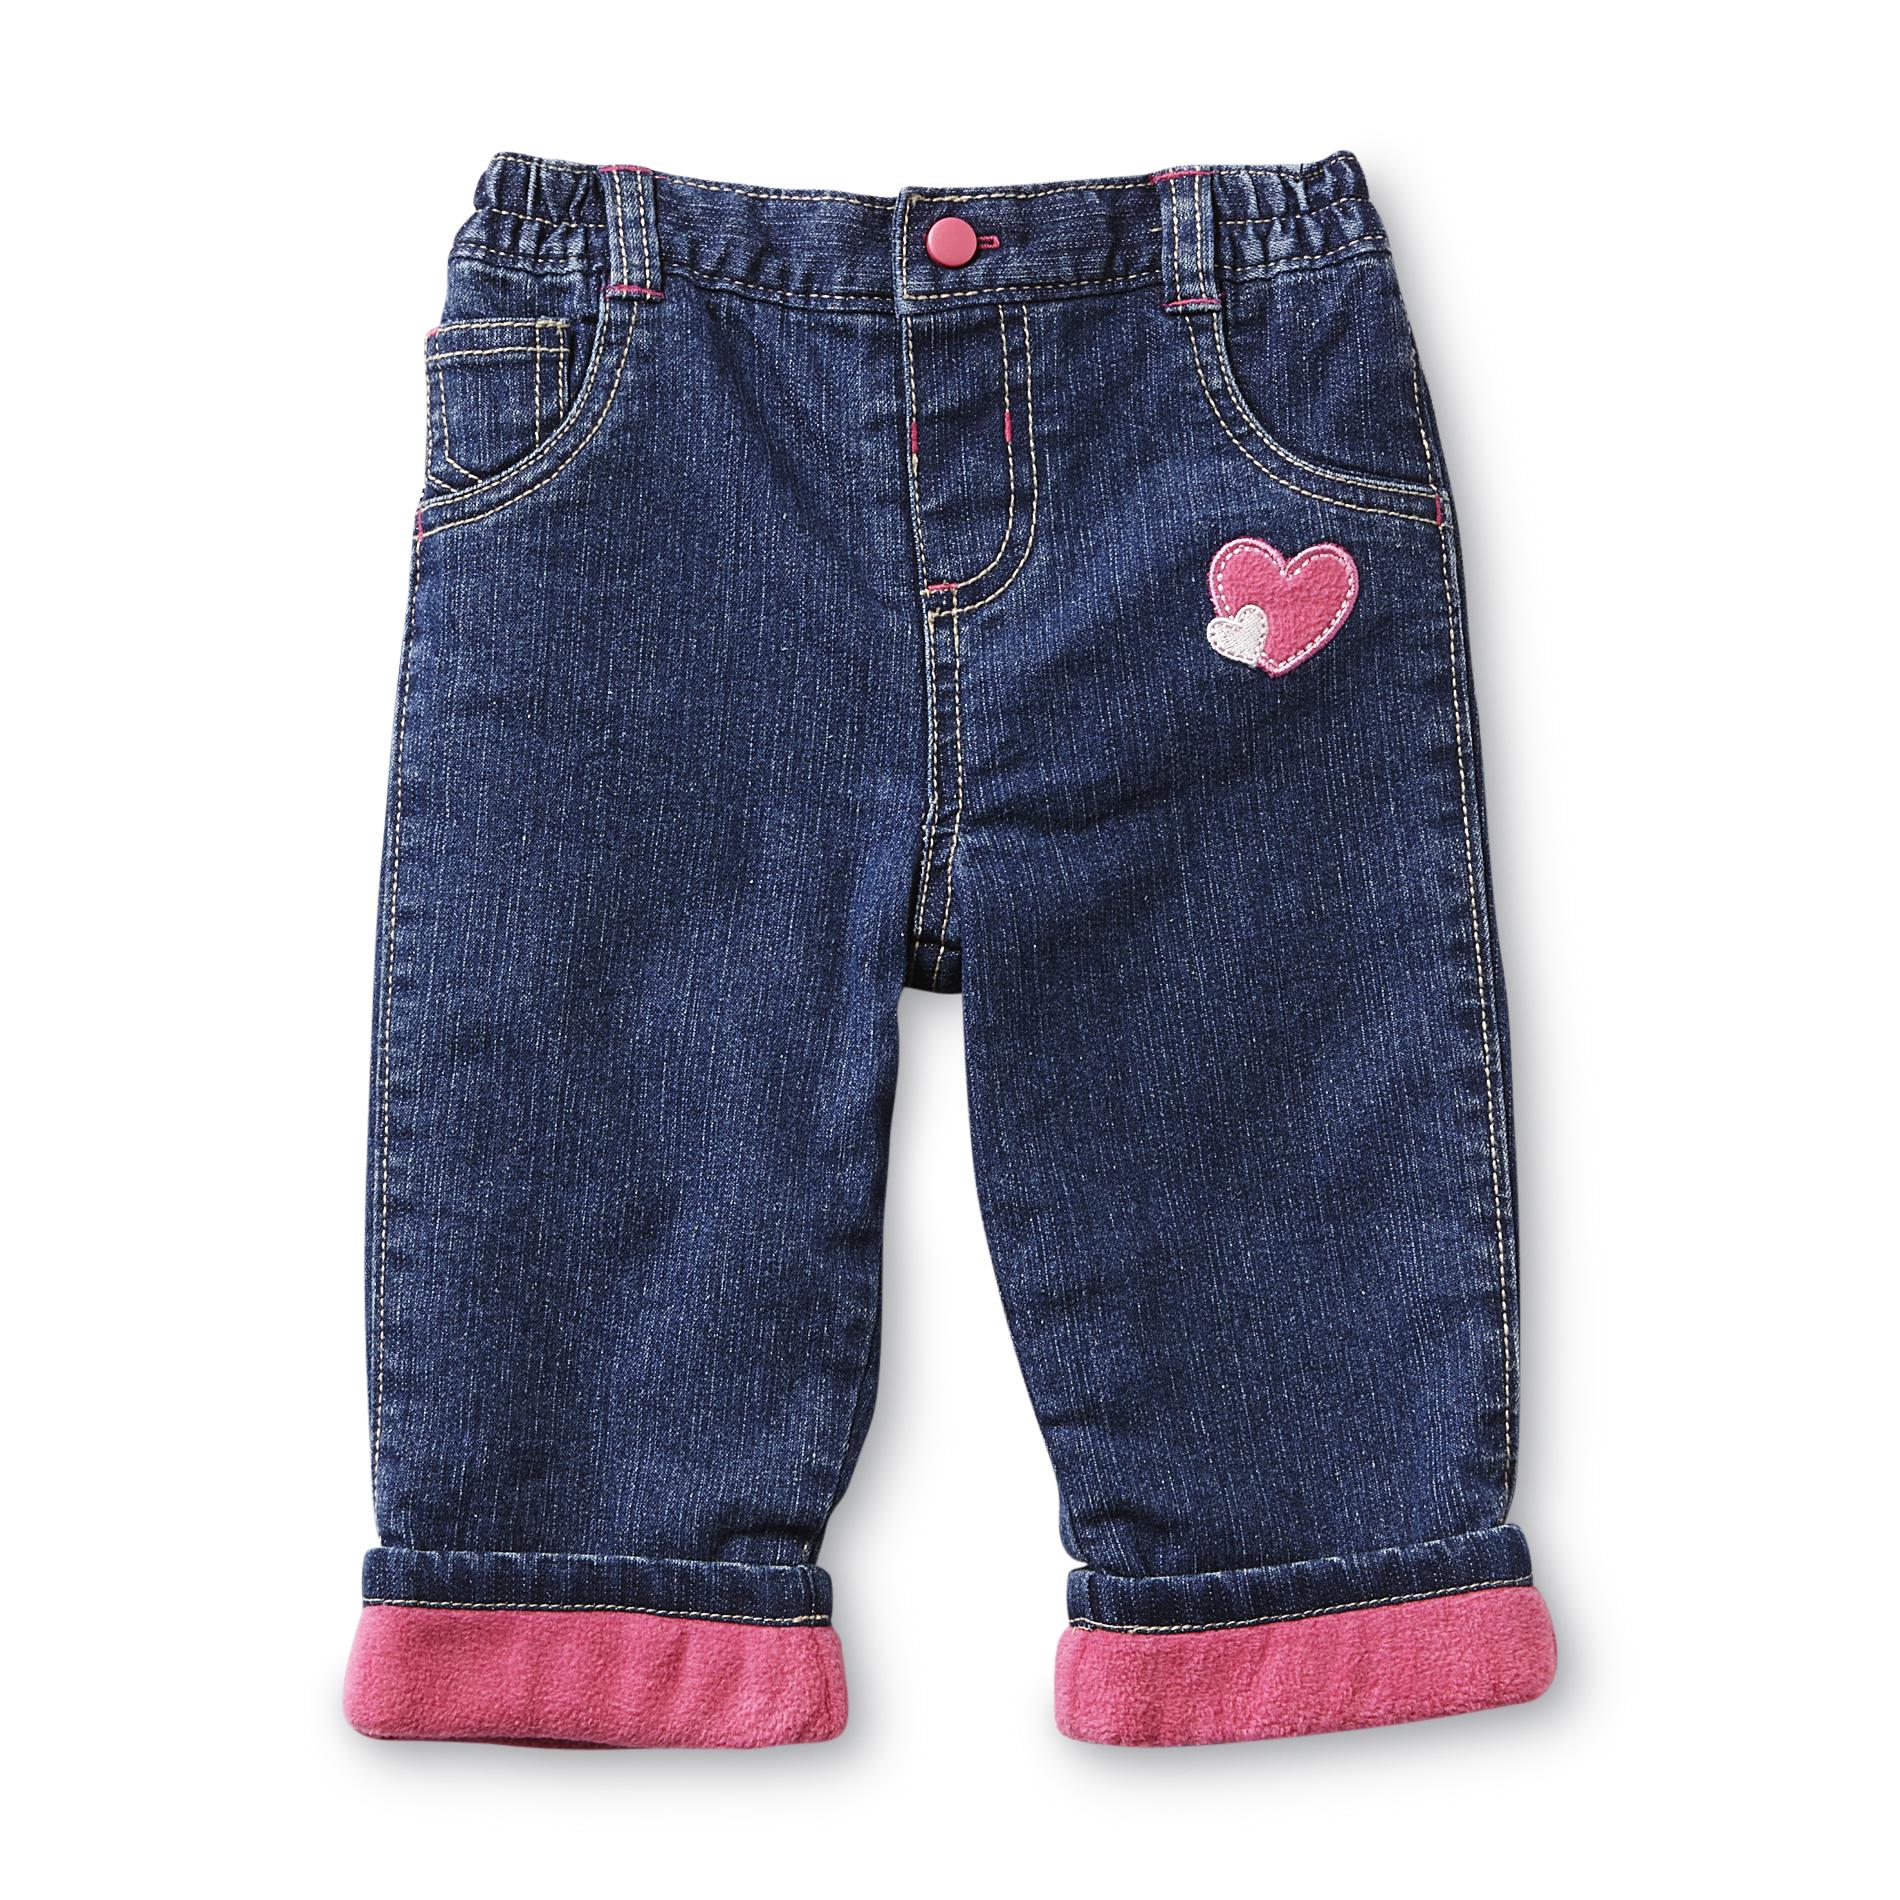 Small Wonders Infant Girl's Embroidered Fleece-Lined Jeans - Hearts